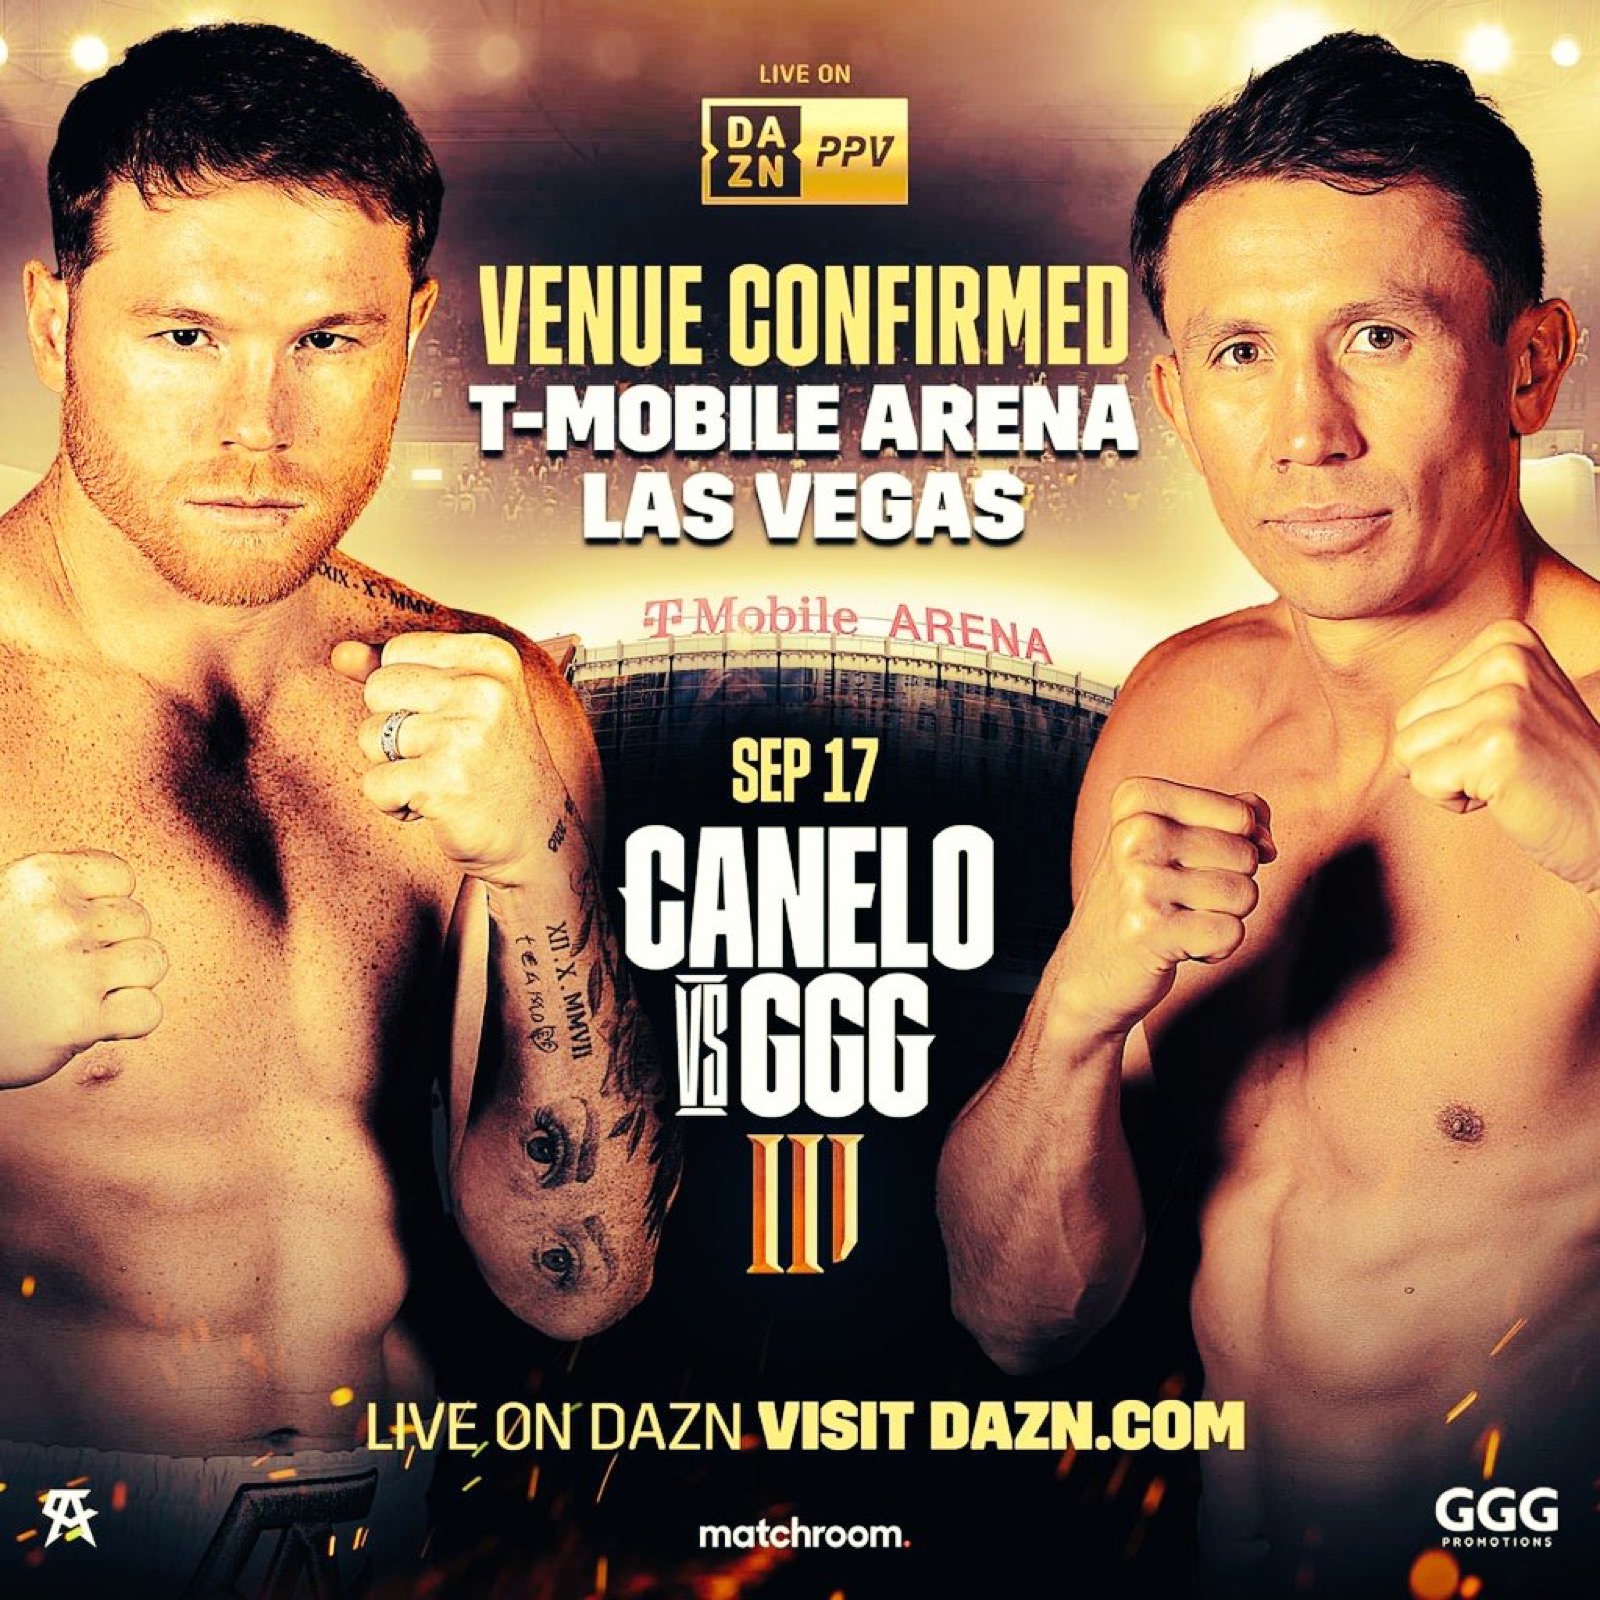 Image: Canelo vs. Golovkin III - 2 months to go before trilogy on Sept.17th